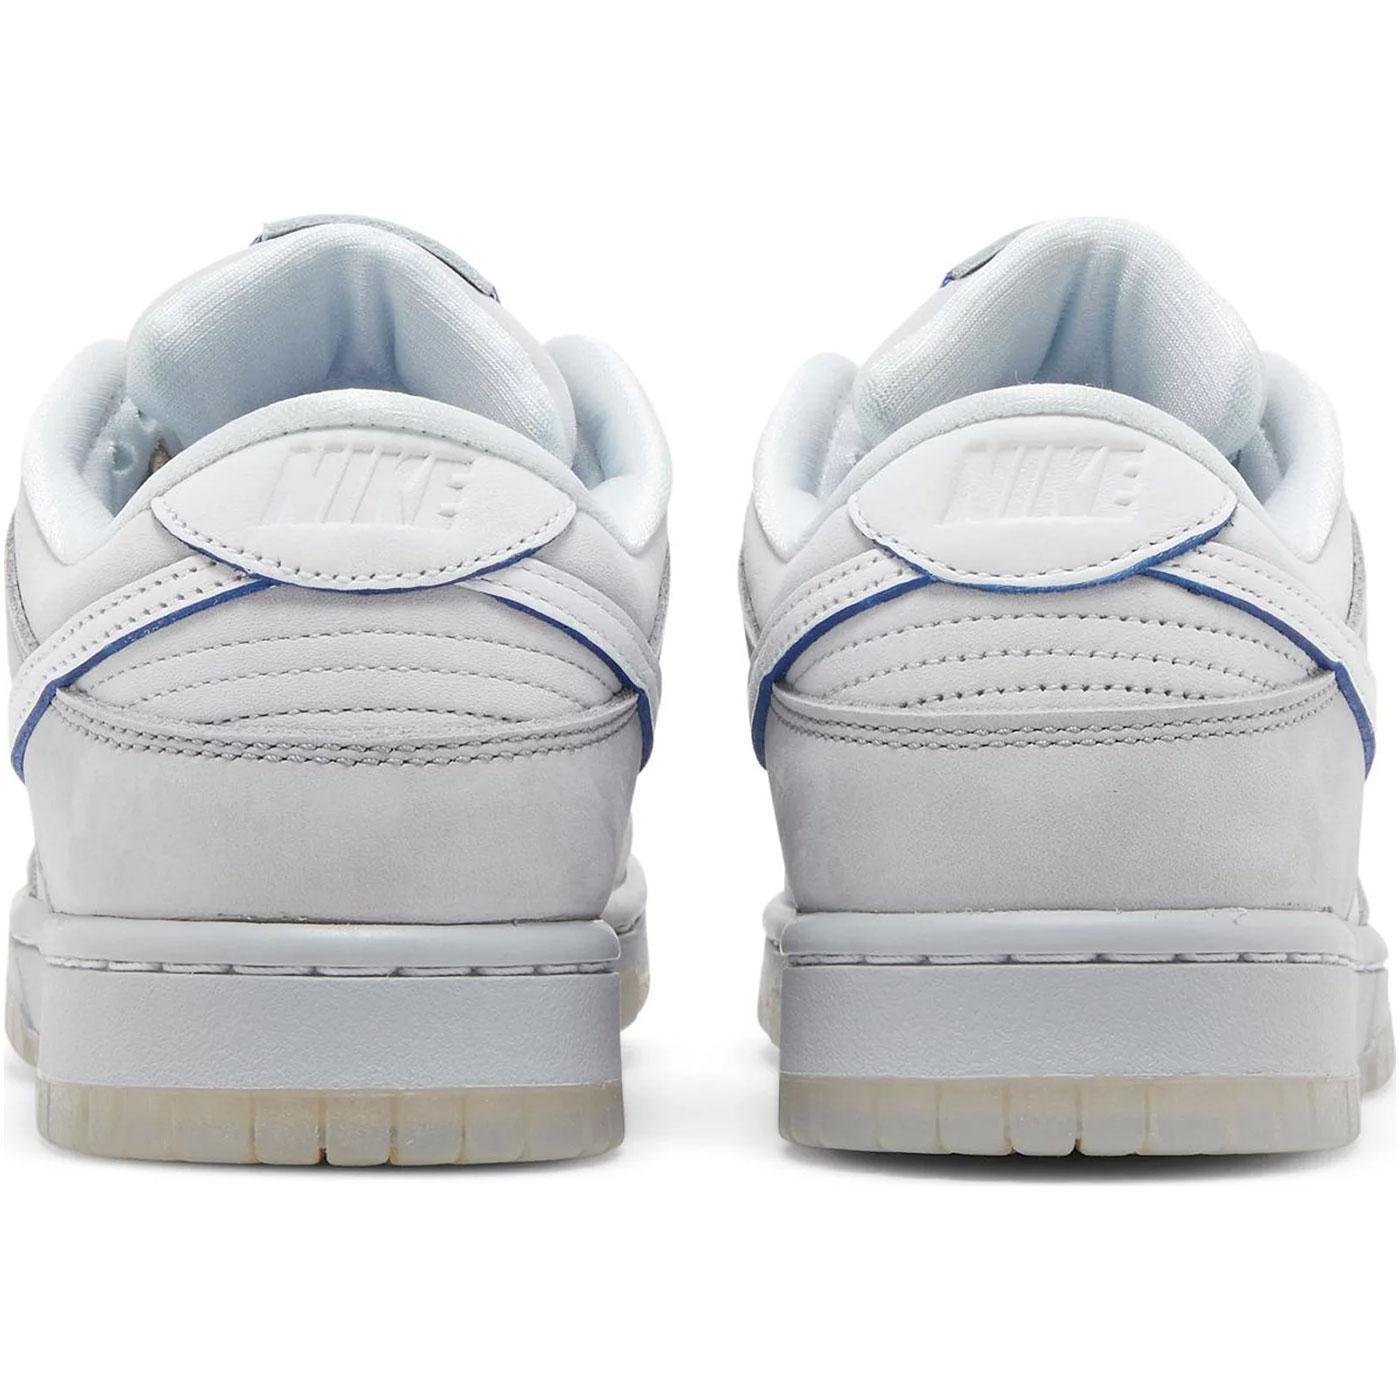 Dunk Low 'Wolf Grey Pure Platinum' DX3722 001 Rear | Nike